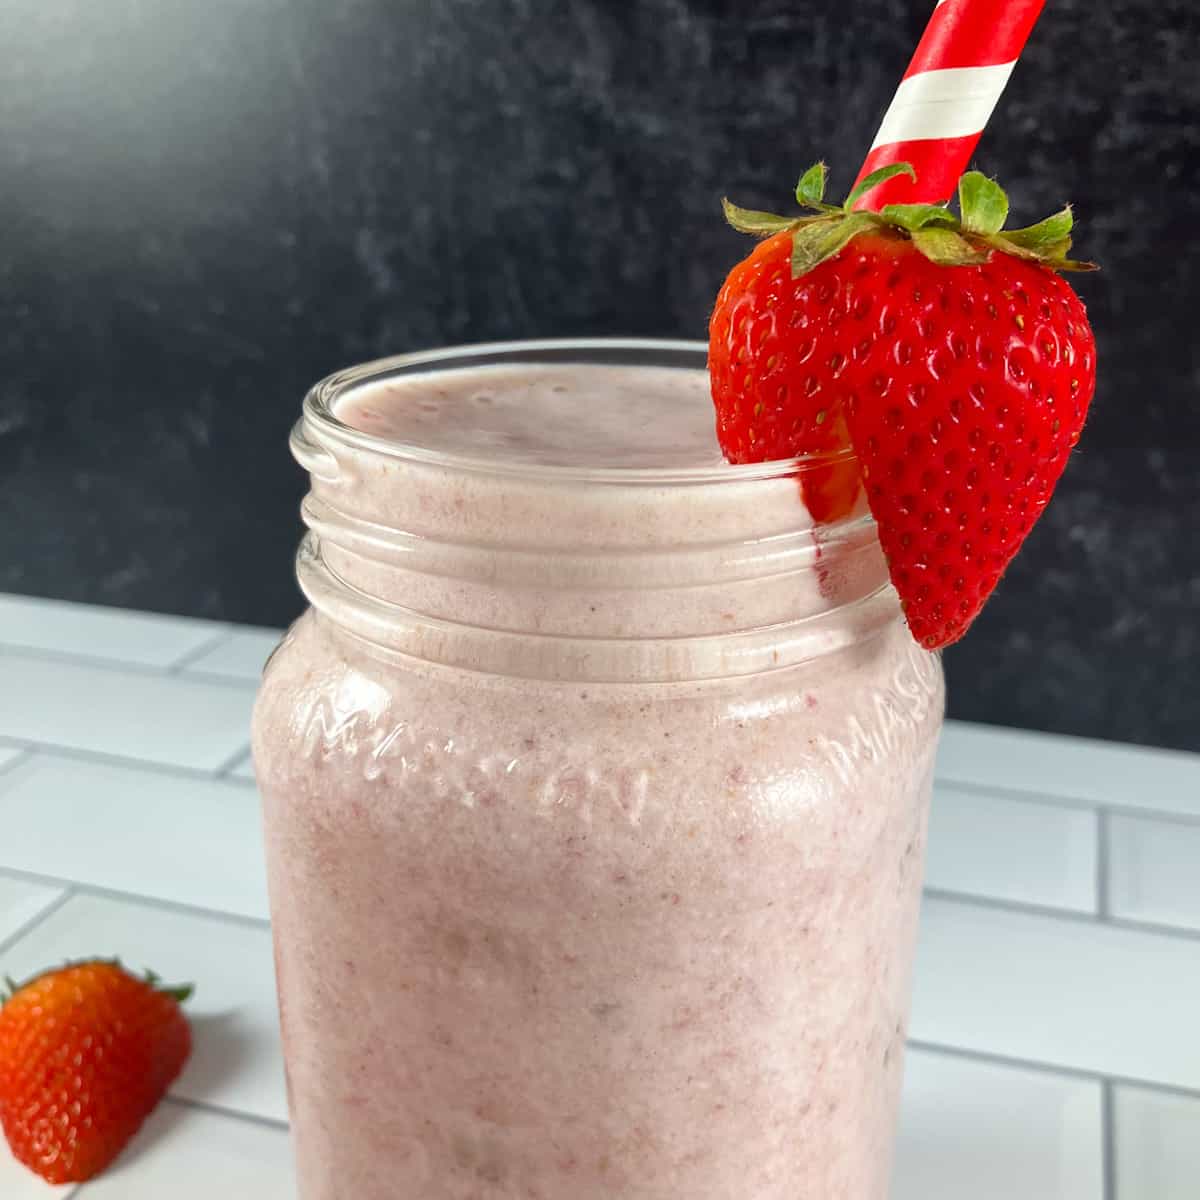 banana peanut butter strawberry smoothie